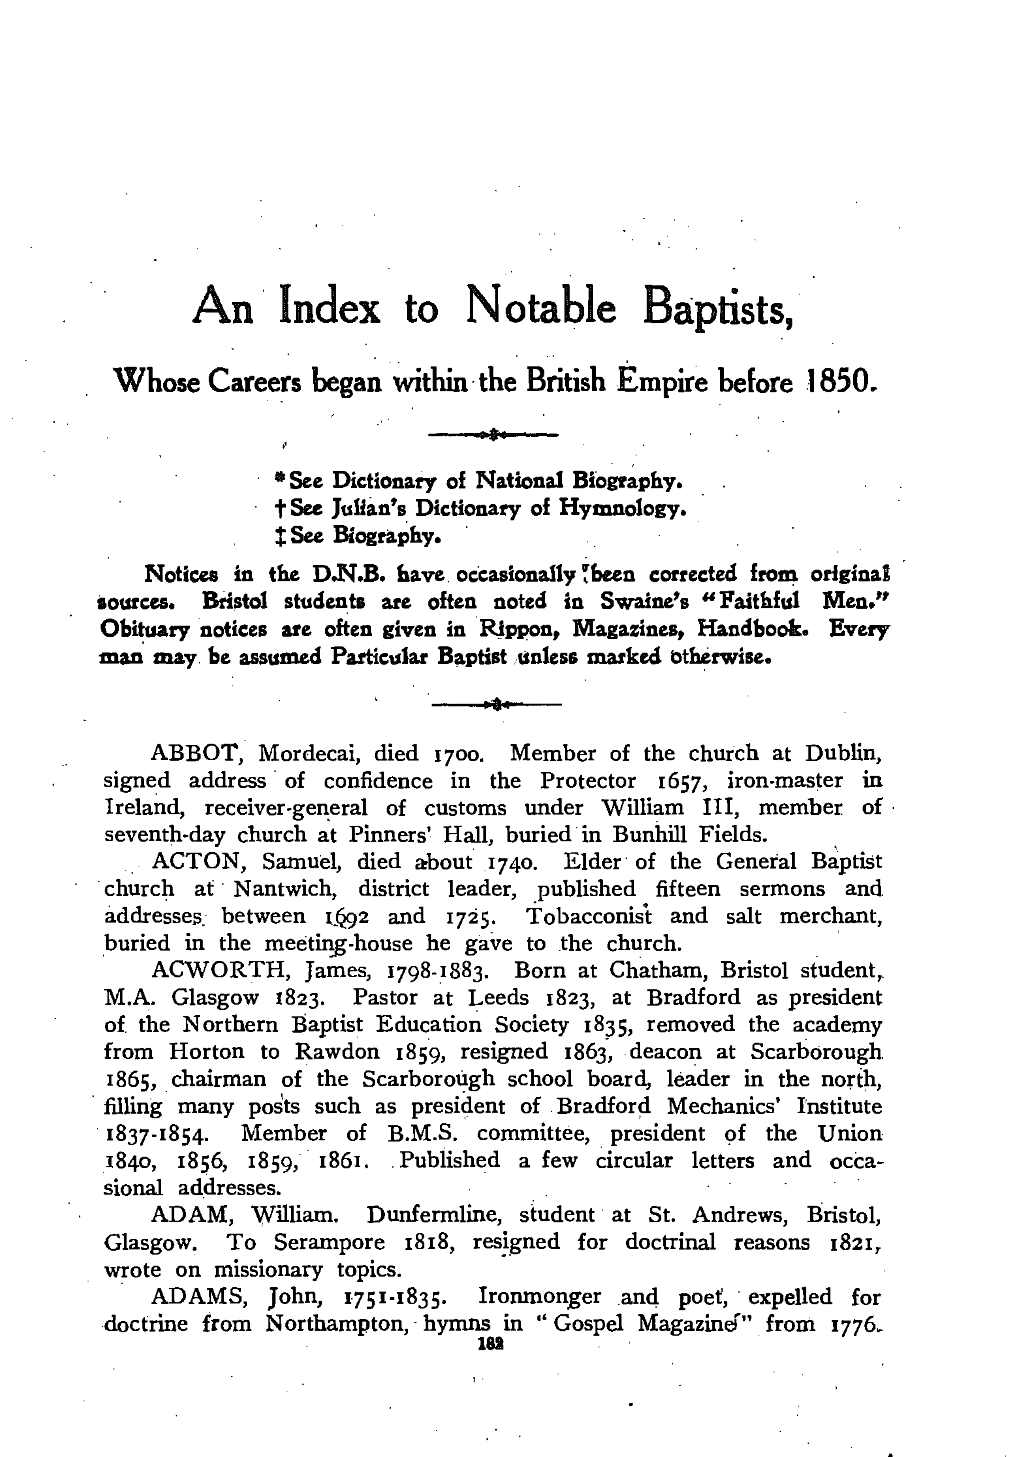 An· Index to Notable Baptists, Whose Careers Began Within·The British Empire Before 1850